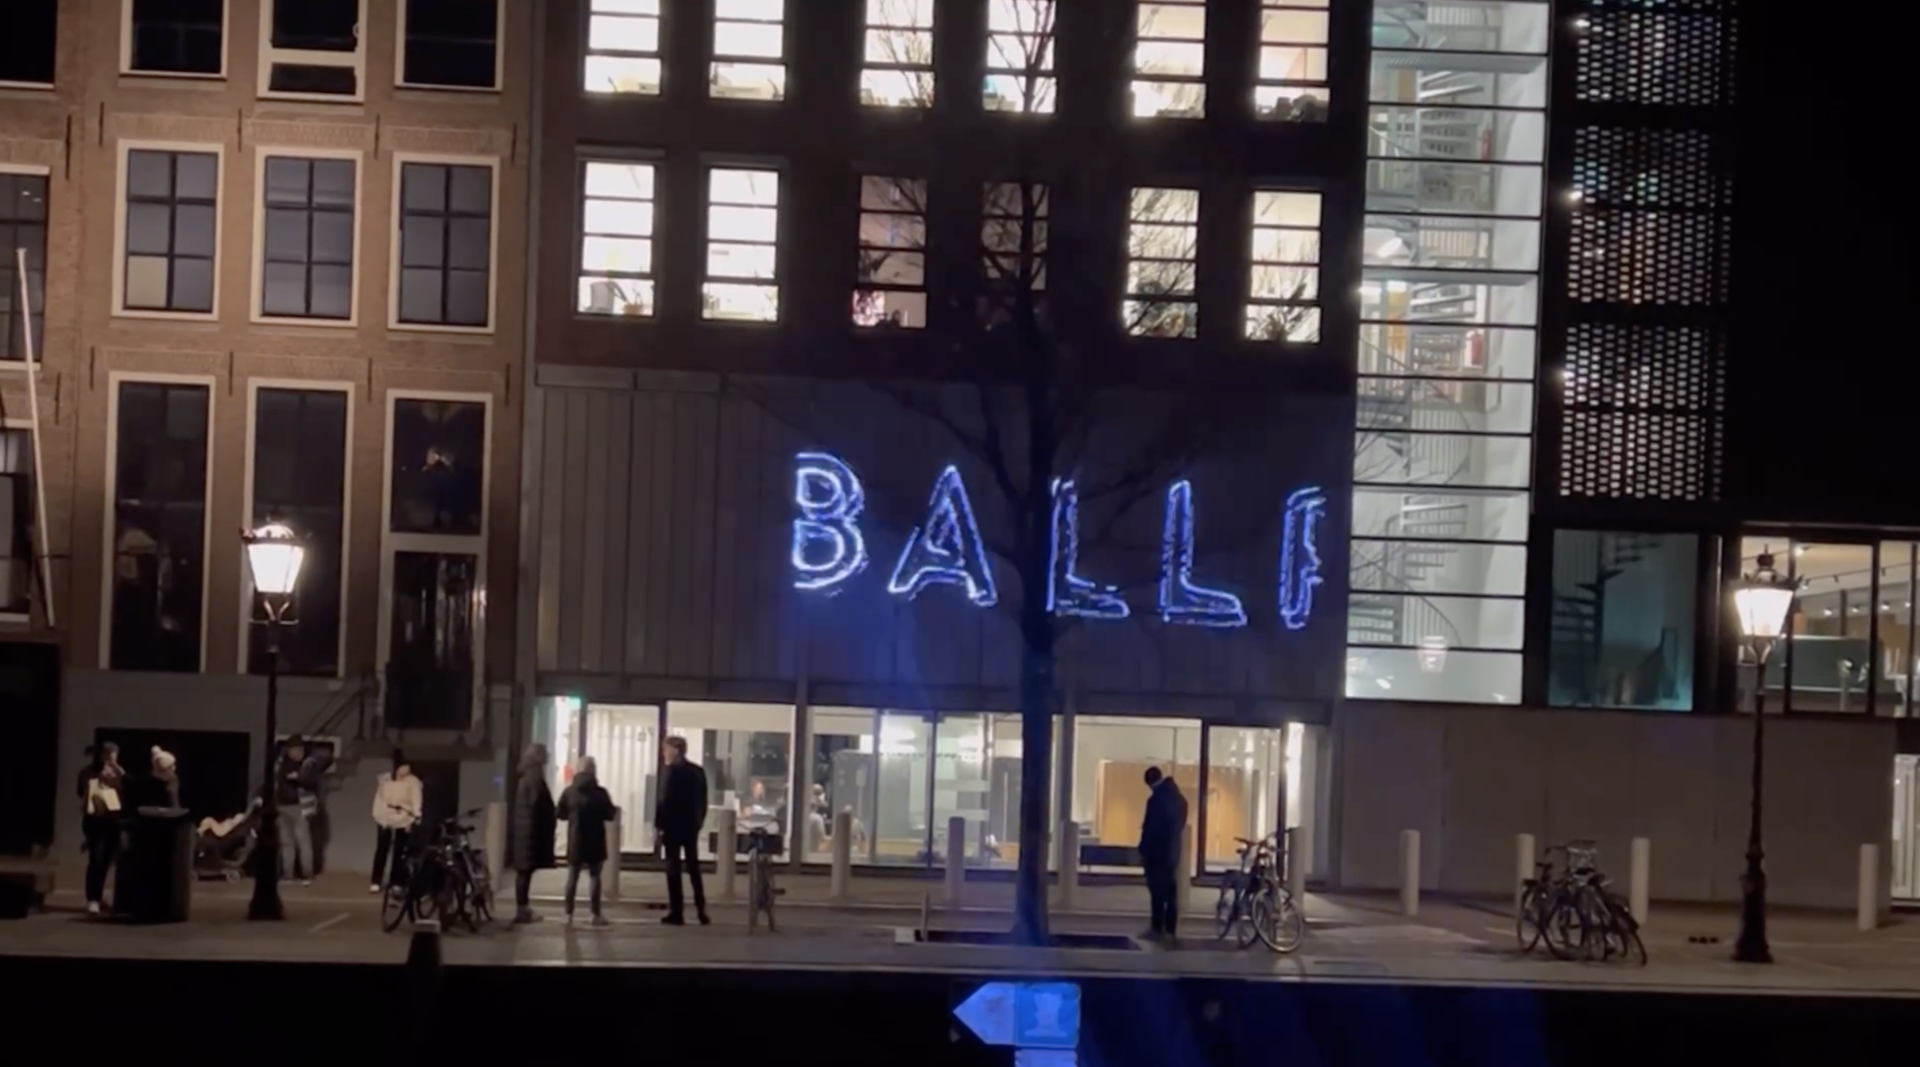 A screenshot from video showing a laser projection on a building wall that says "Ballp."